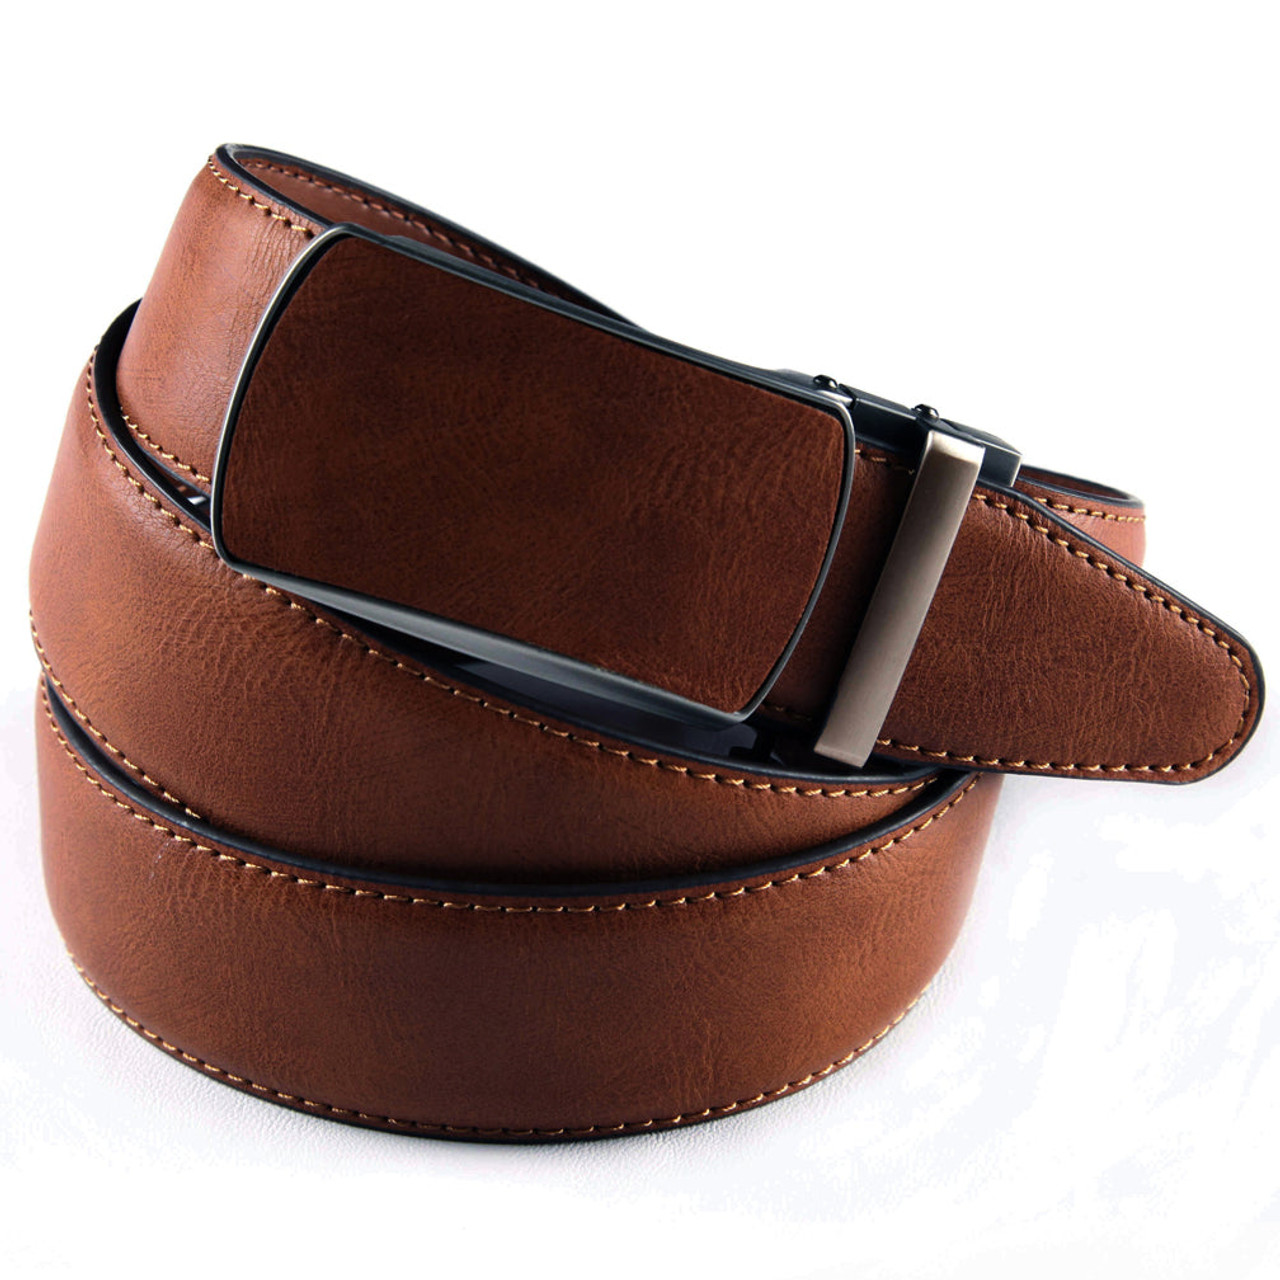 Men's Slide Ratchet Belt with Leather-Covered Buckle product image